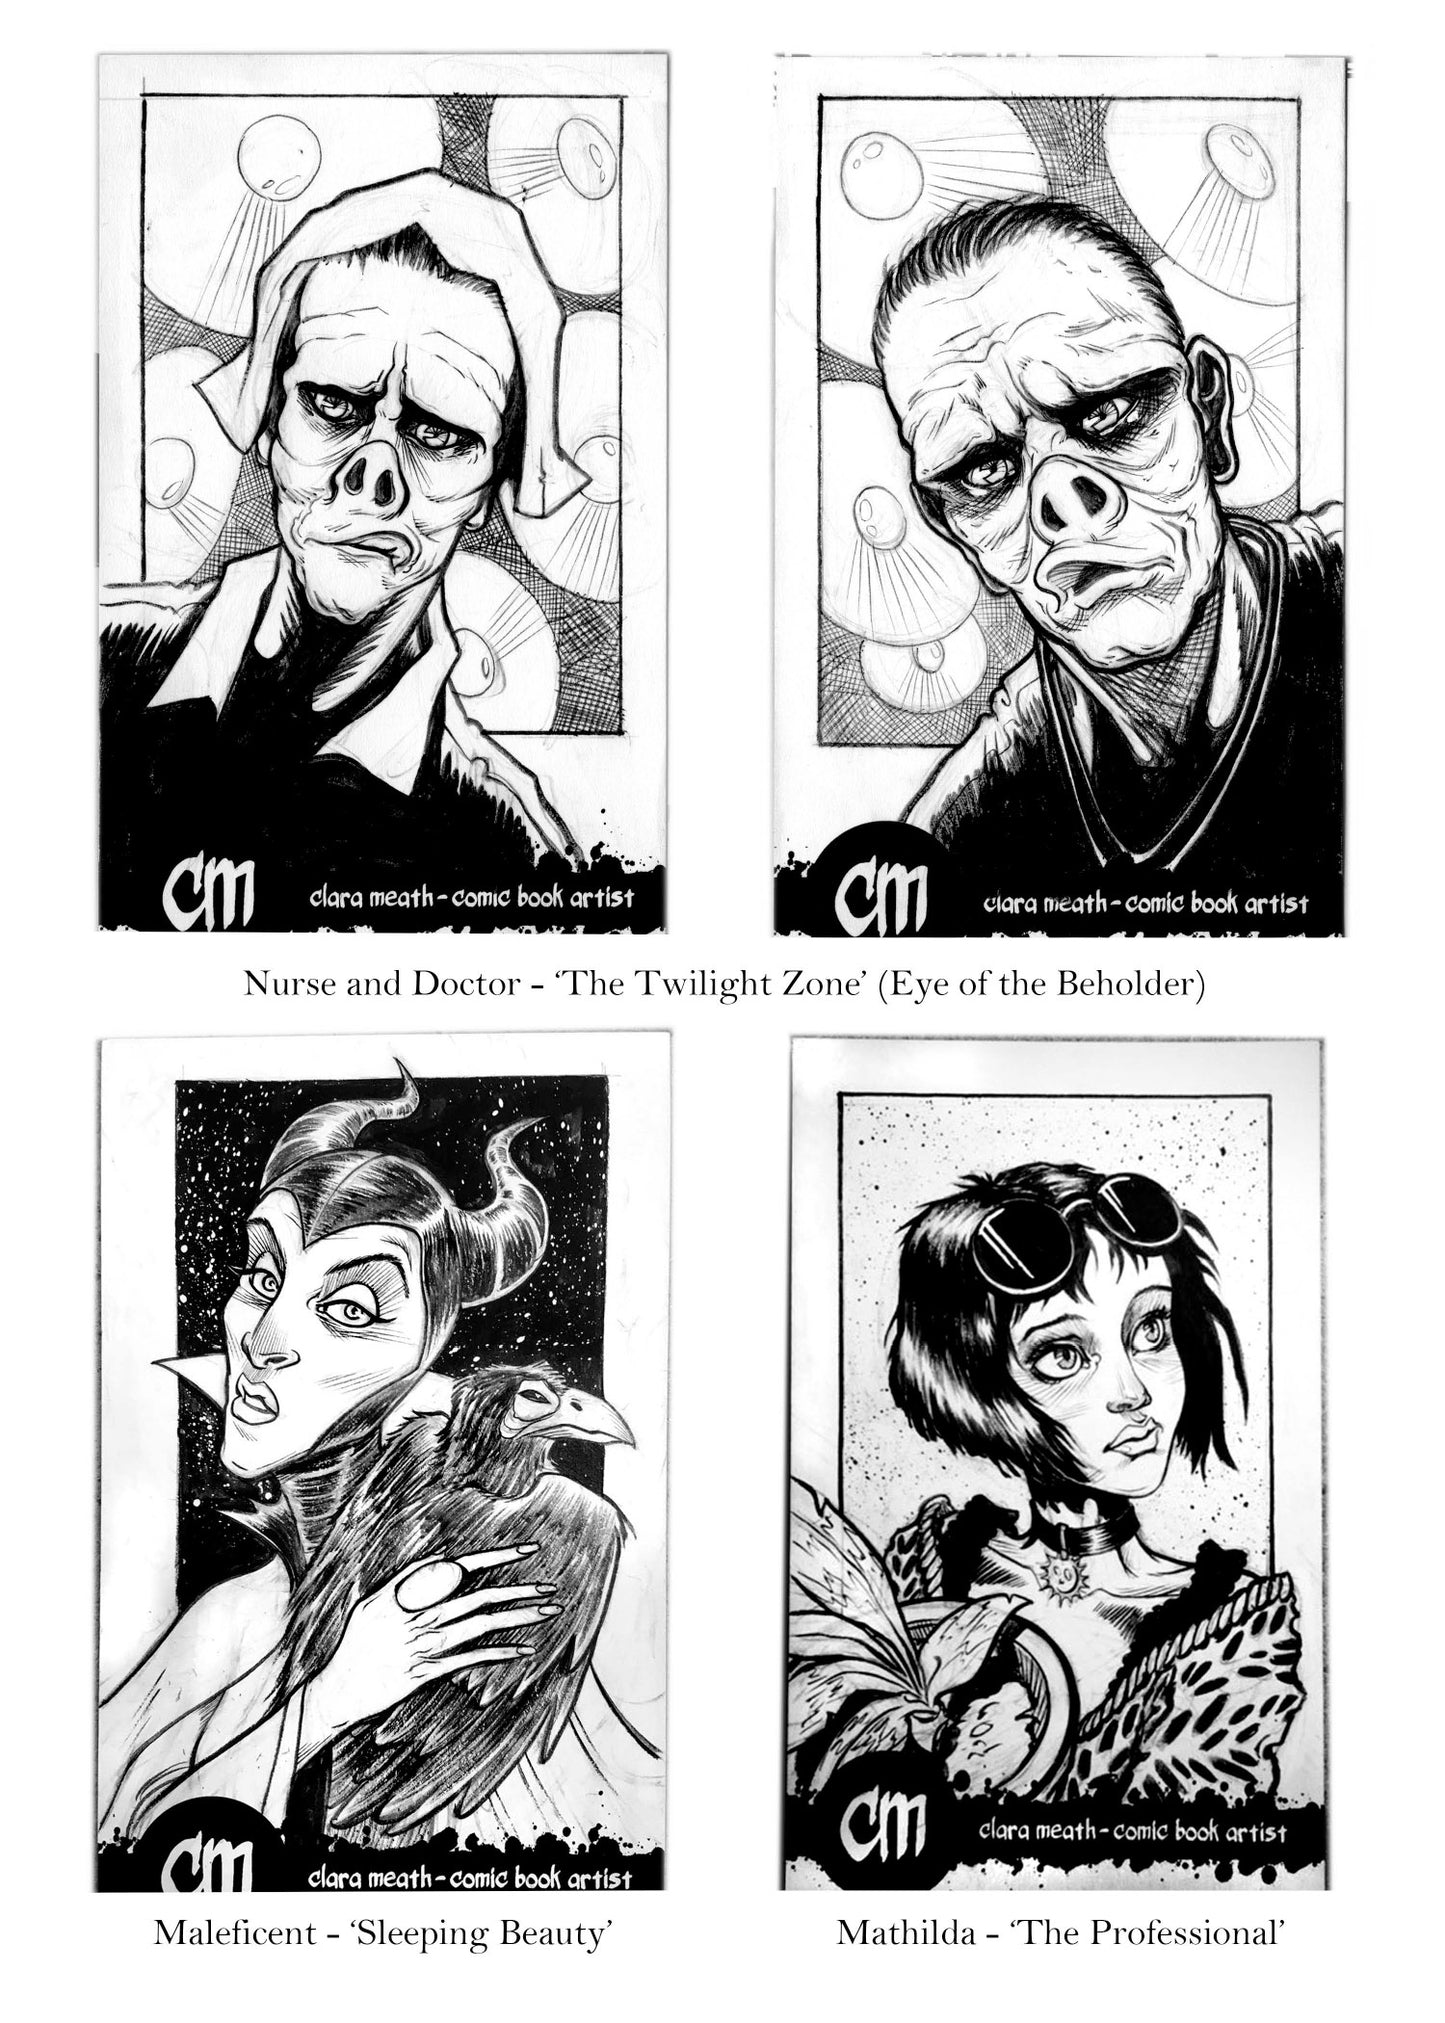 Just the Sketchcards Vol. 1: A Collection of Sketchcard Art by Clara Meath